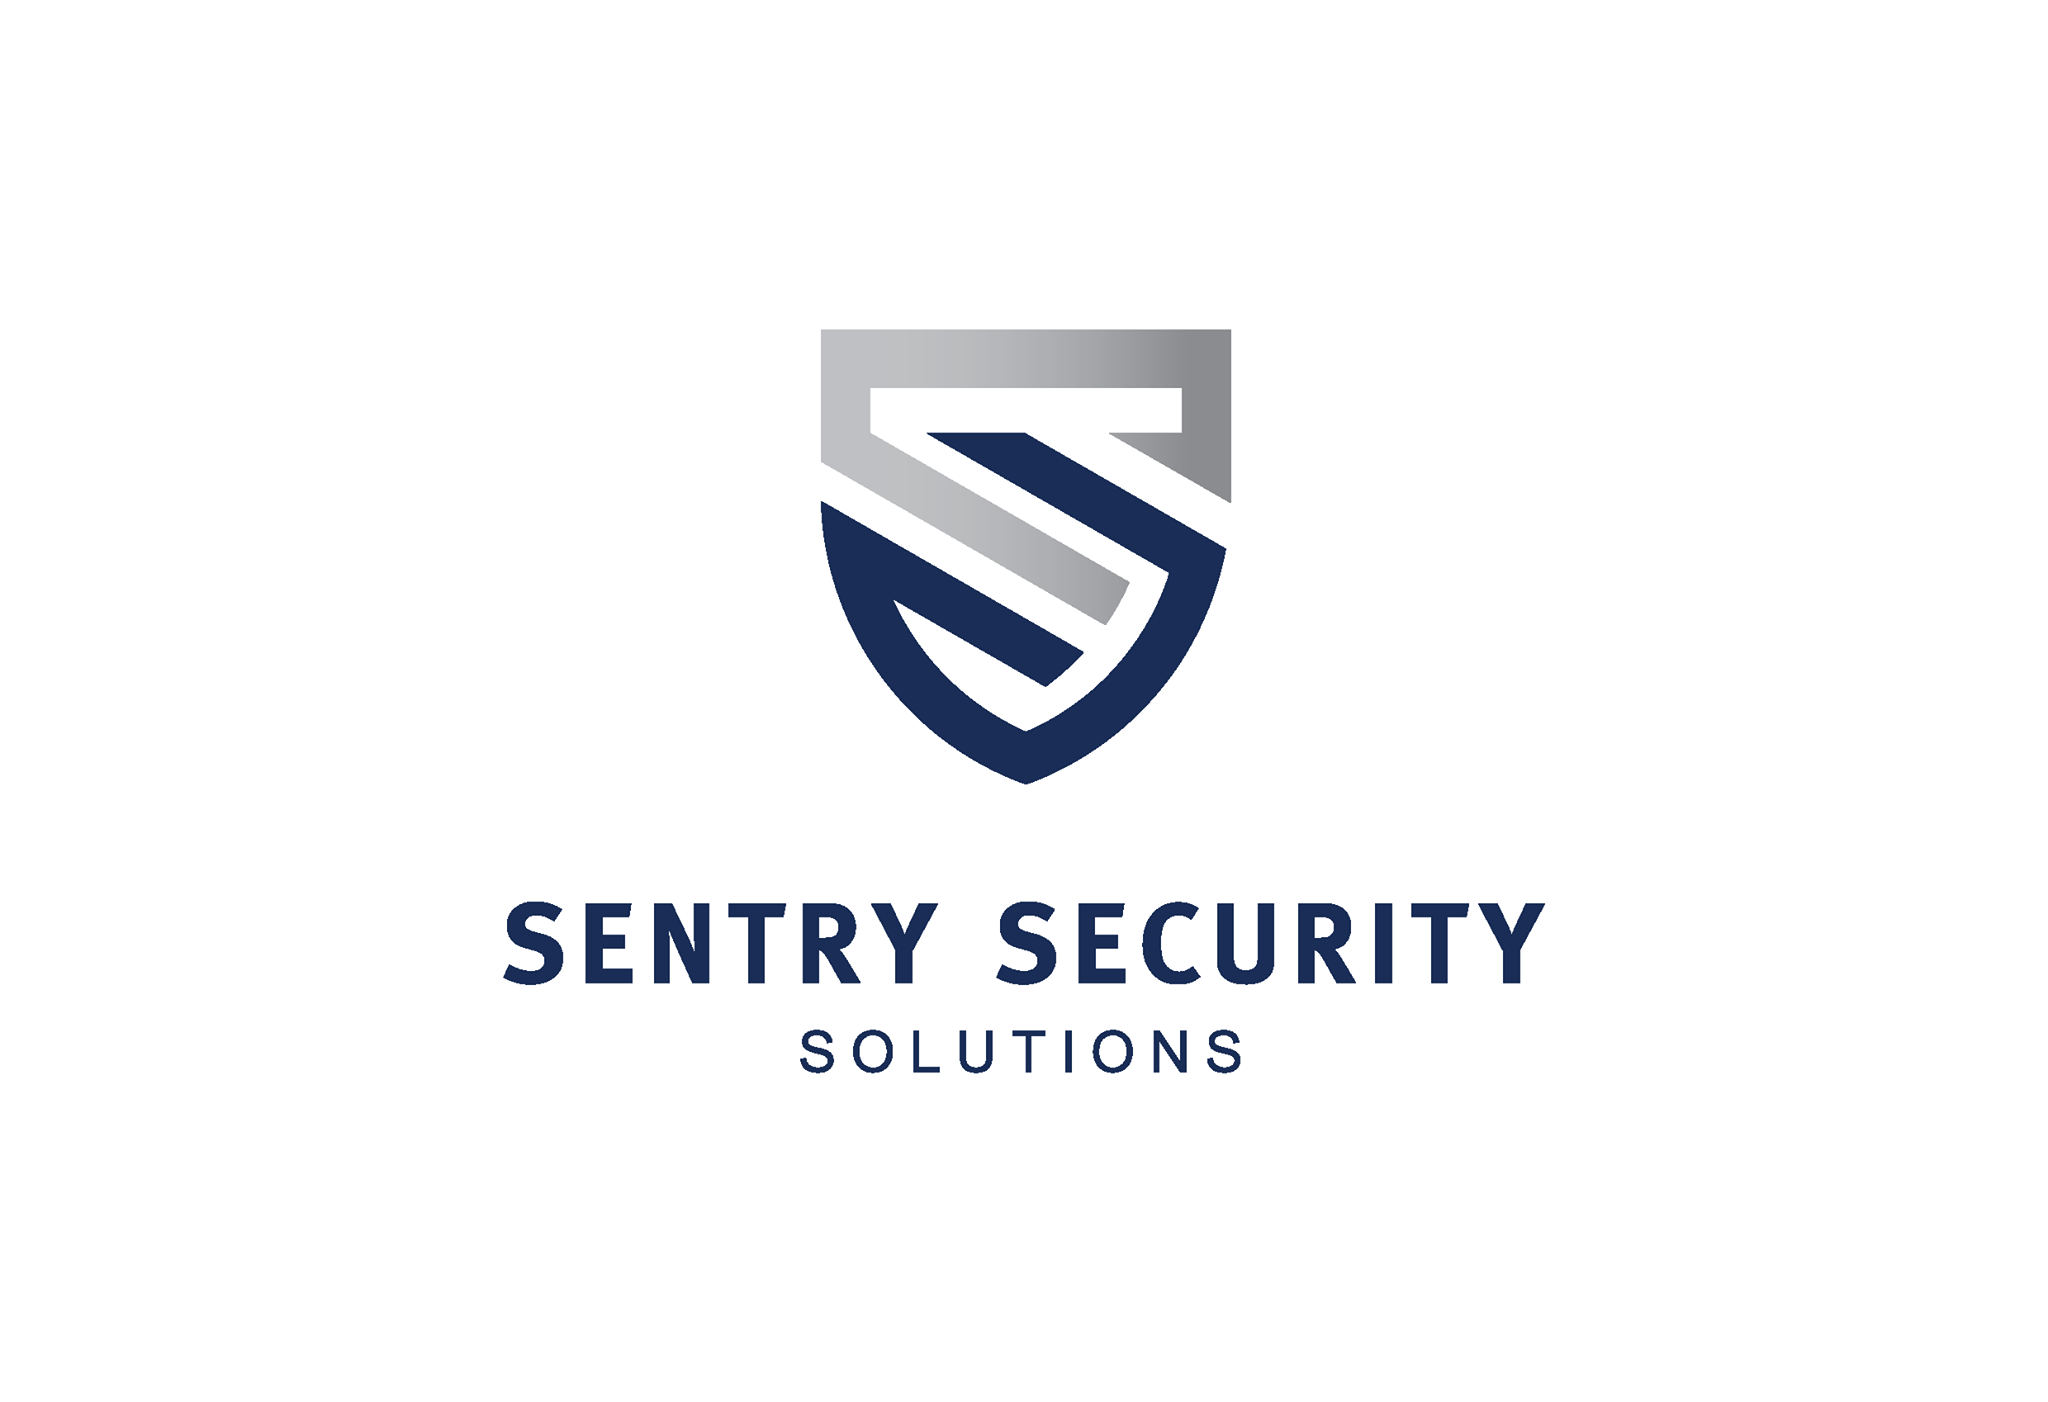 CCTV - Sentry Security Solutions